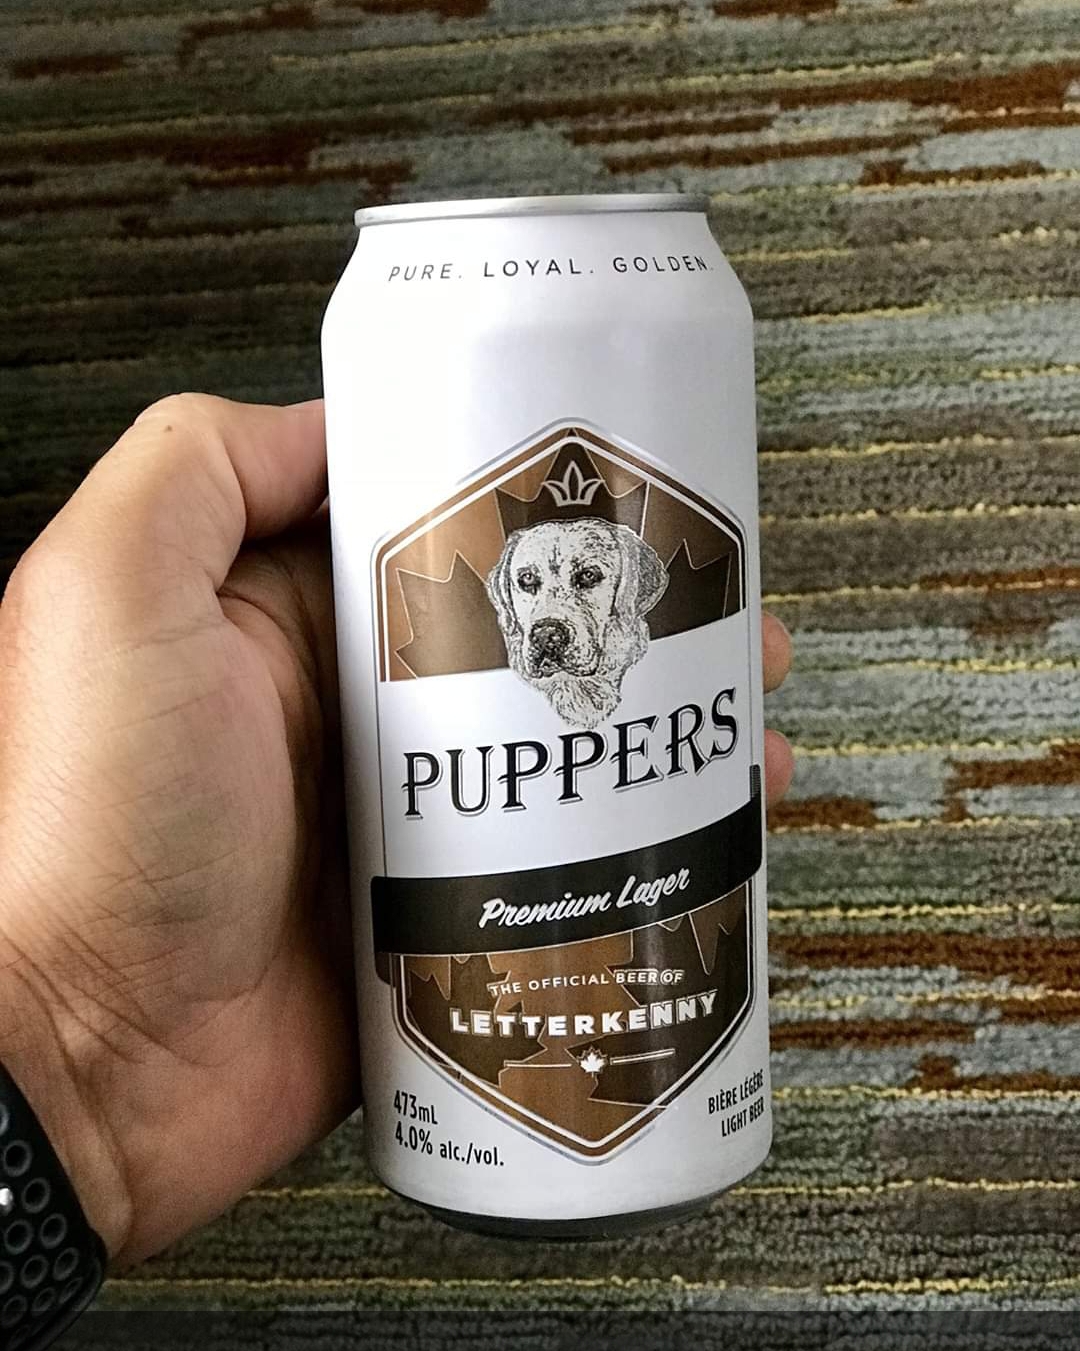 beer - Pure Loyal Golden Puppers Premium Lager Letterkenny Ro . .